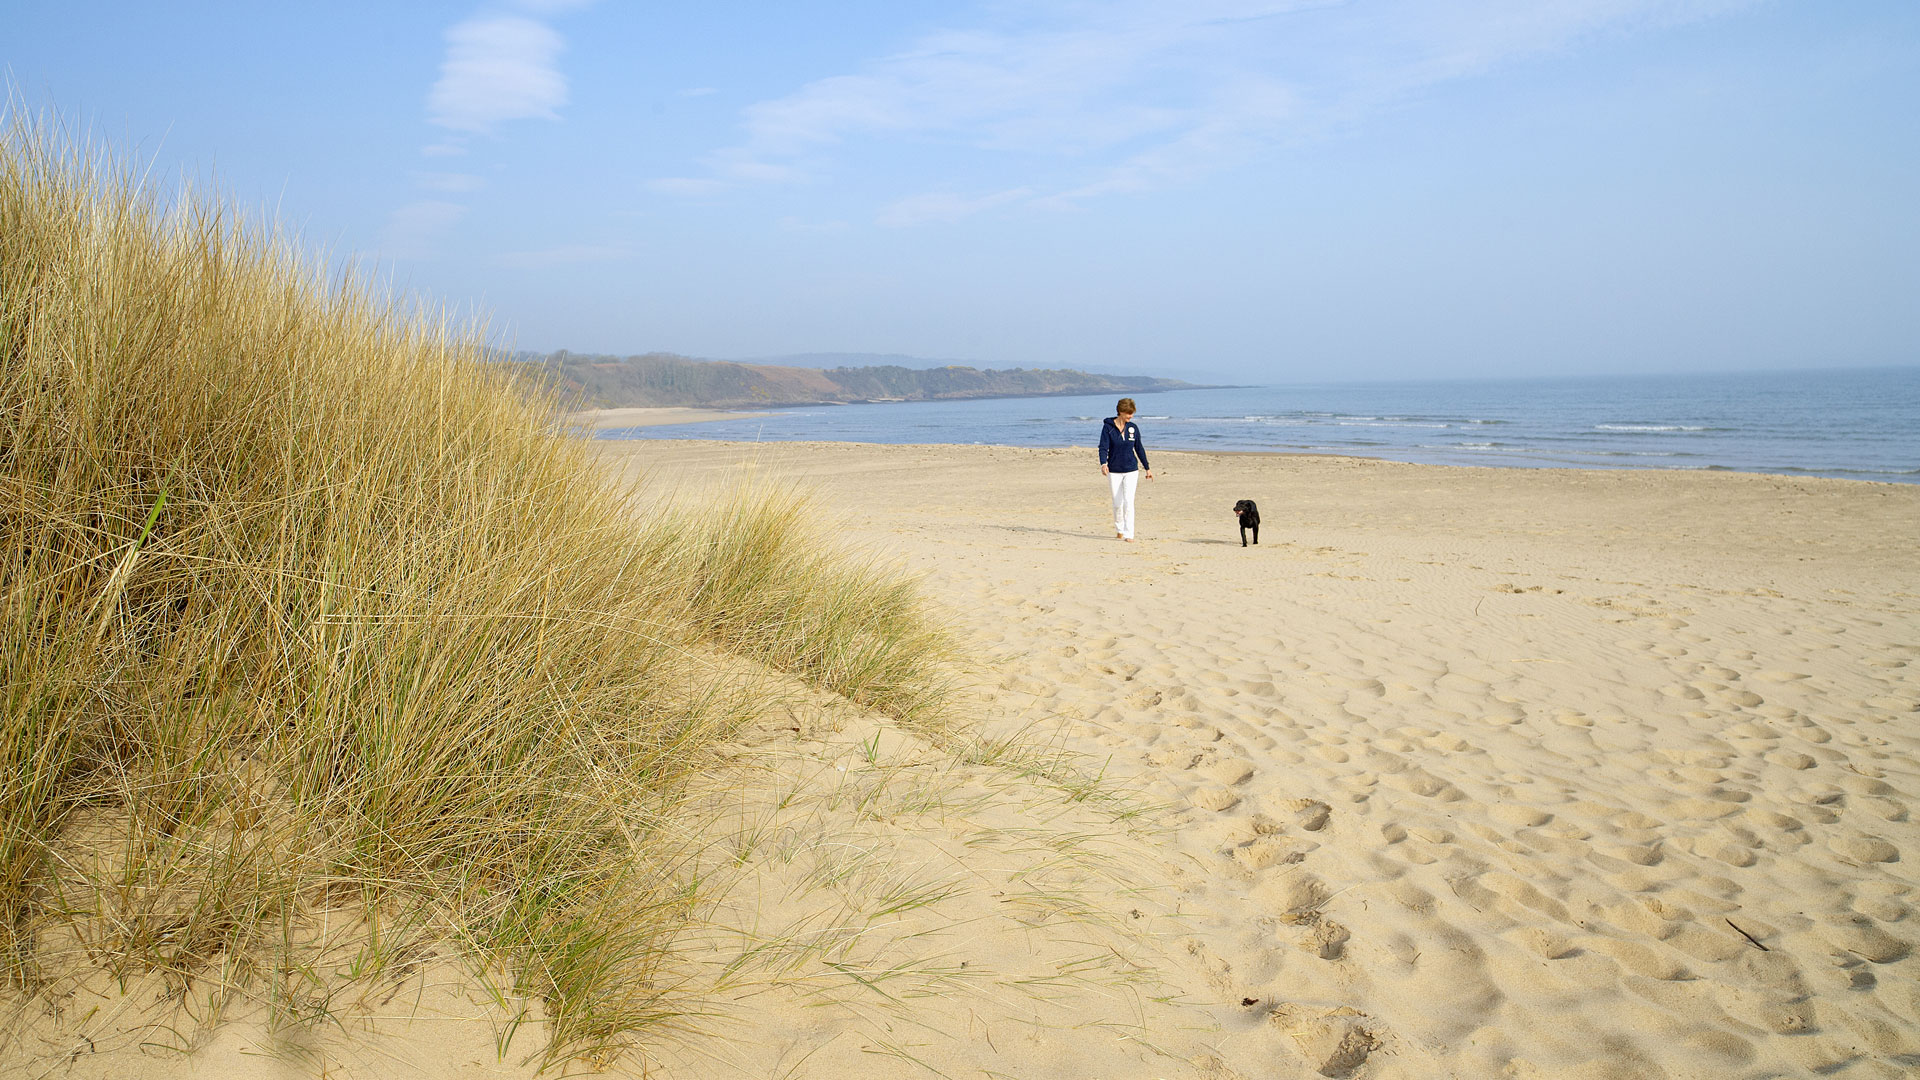 A man walks his dog across a sandy beach by the sea which bends round a grassy sand dune bank